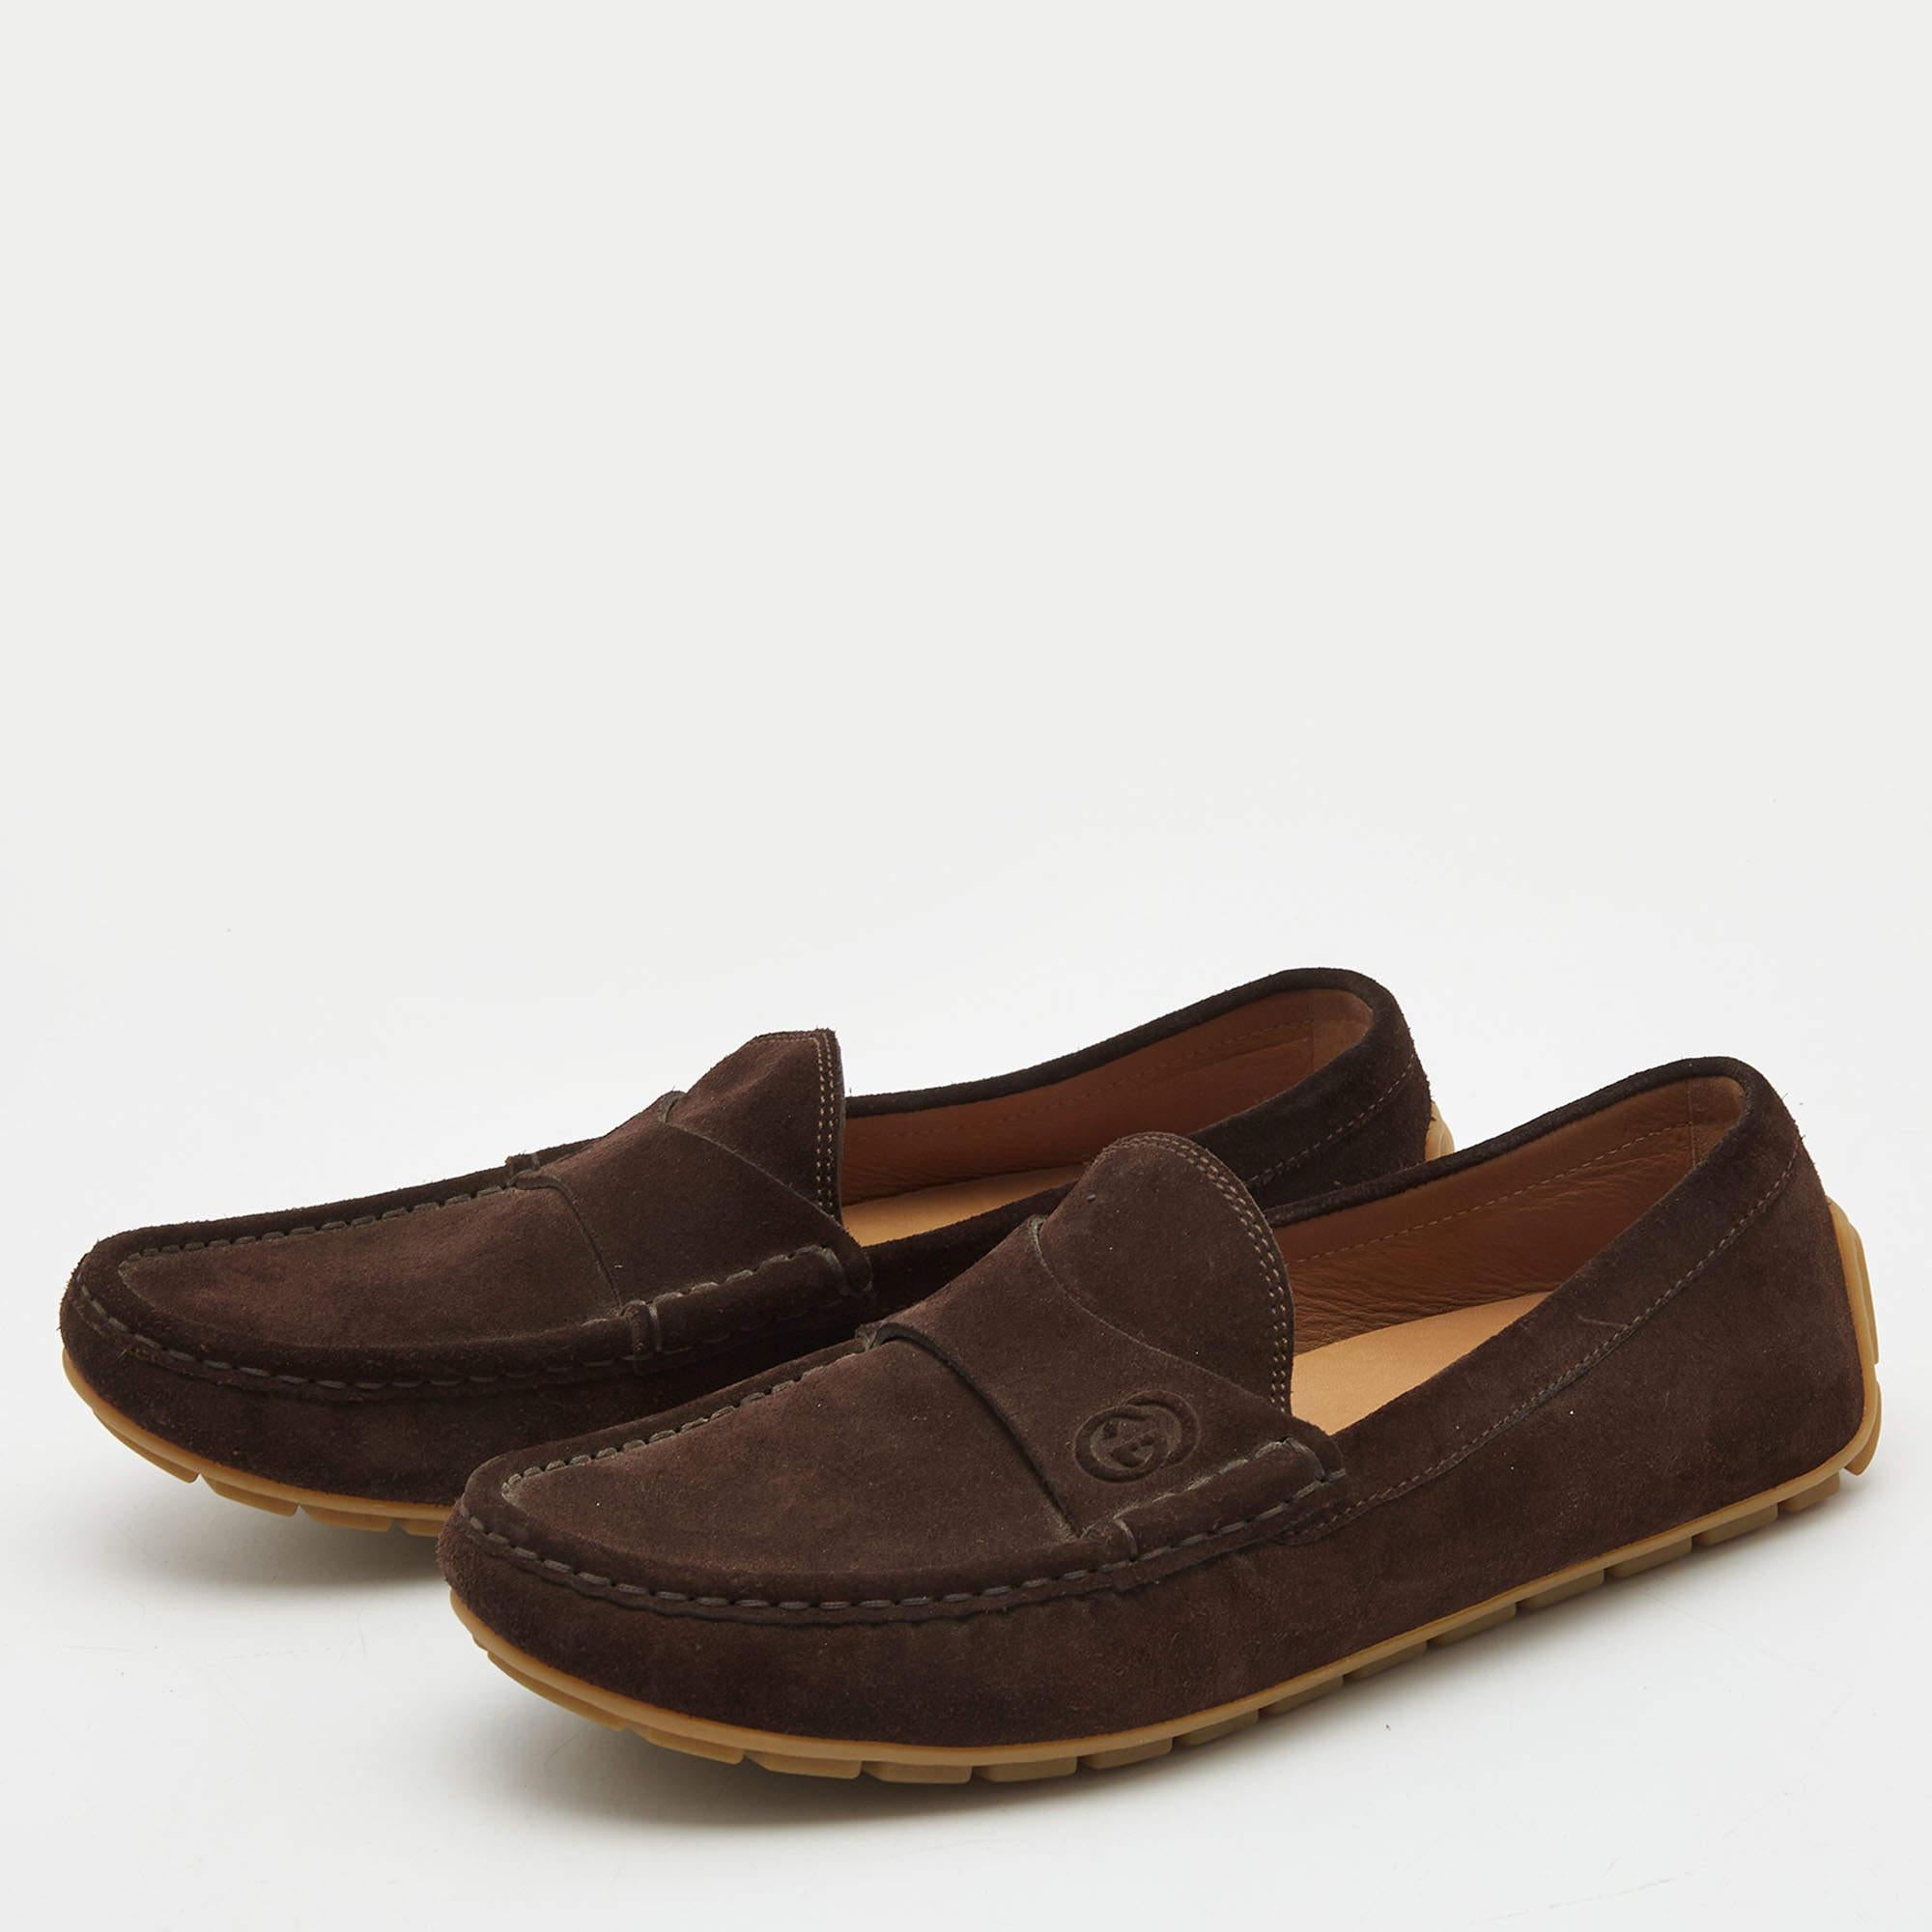 Practical, fashionable, and durable—these designer loafers are carefully built to be fine companions to your everyday style. They come made using the best materials to be a prized buy.

Includes: Original Dustbag, Original Box